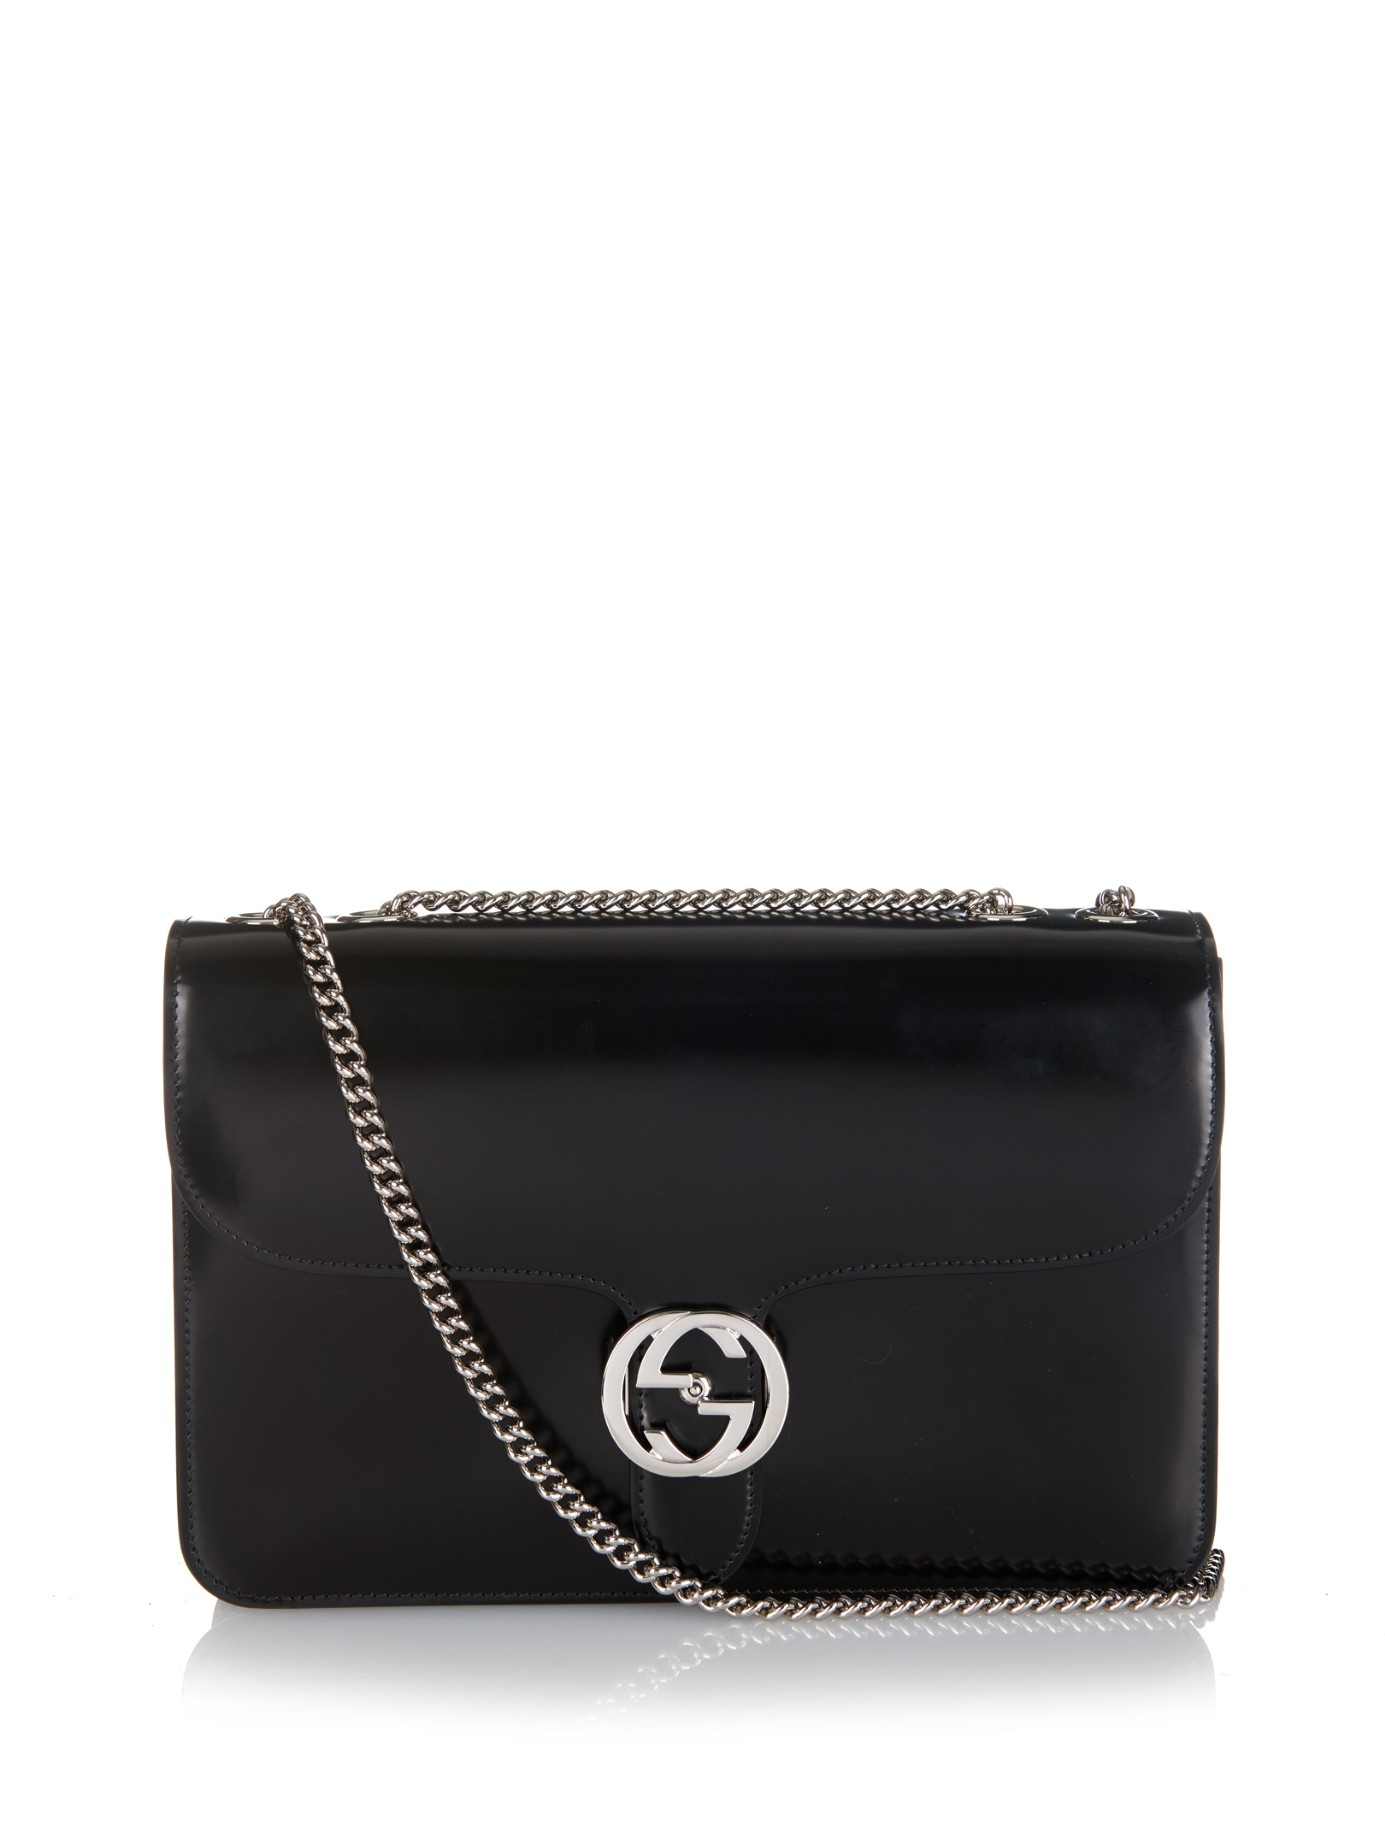 Gucci Line B Leather Bag in Black - Lyst